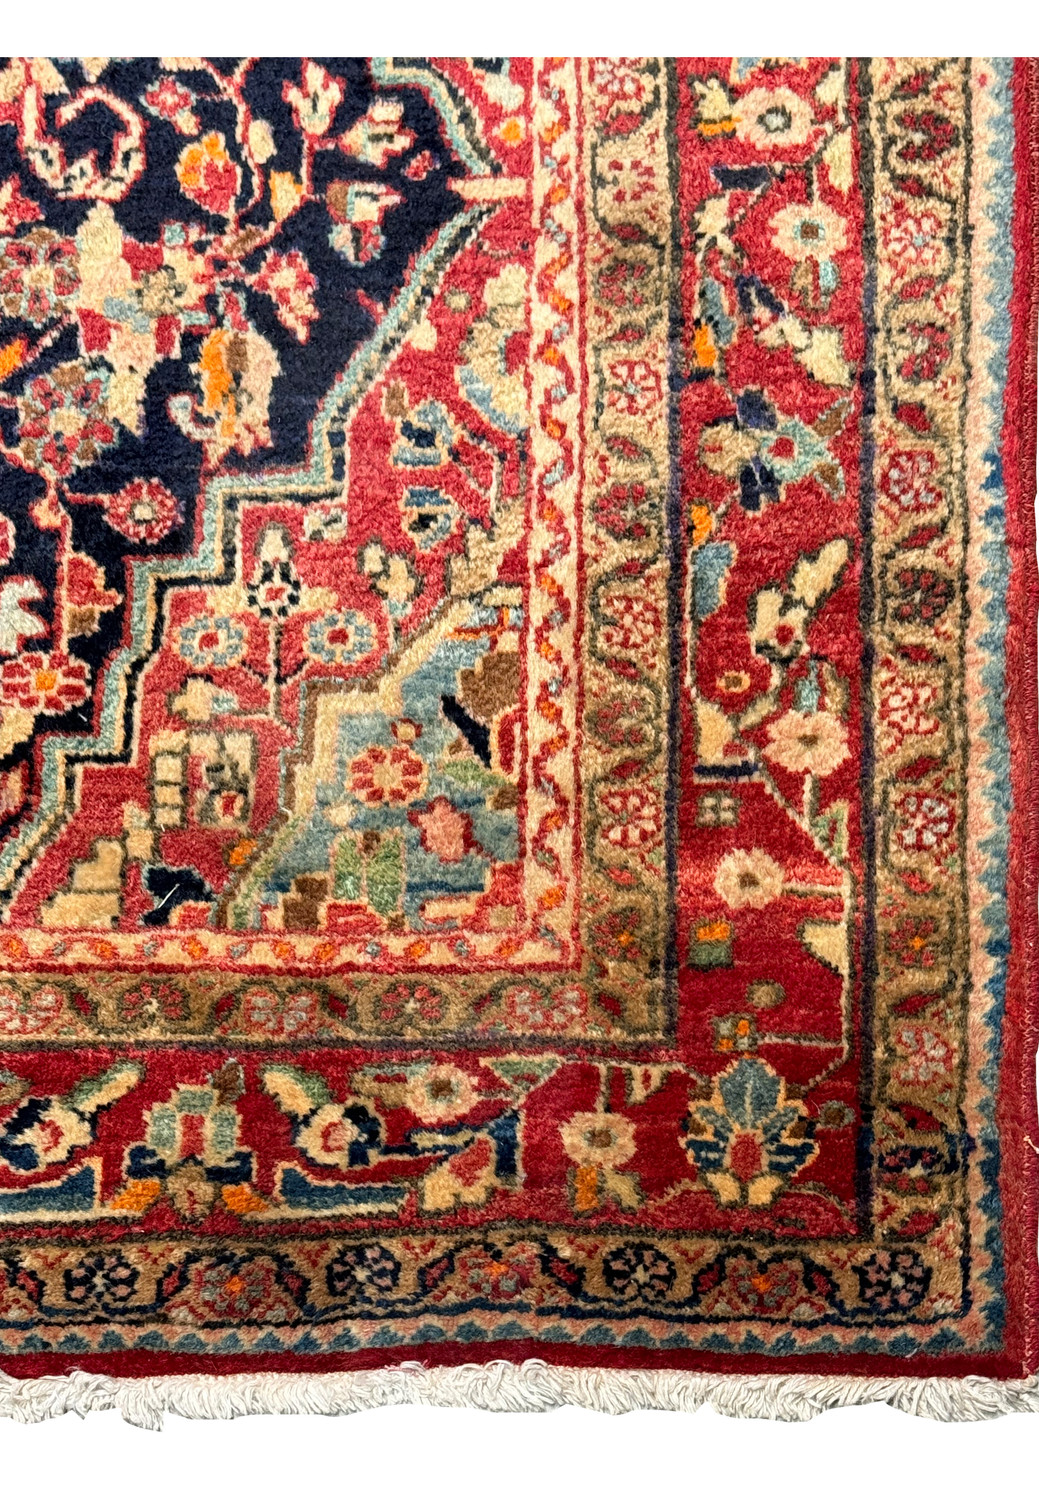 A corner section of the Persian Sarough Rug, displaying the symmetry of the border designs in crimson, sage green, and navy blue.